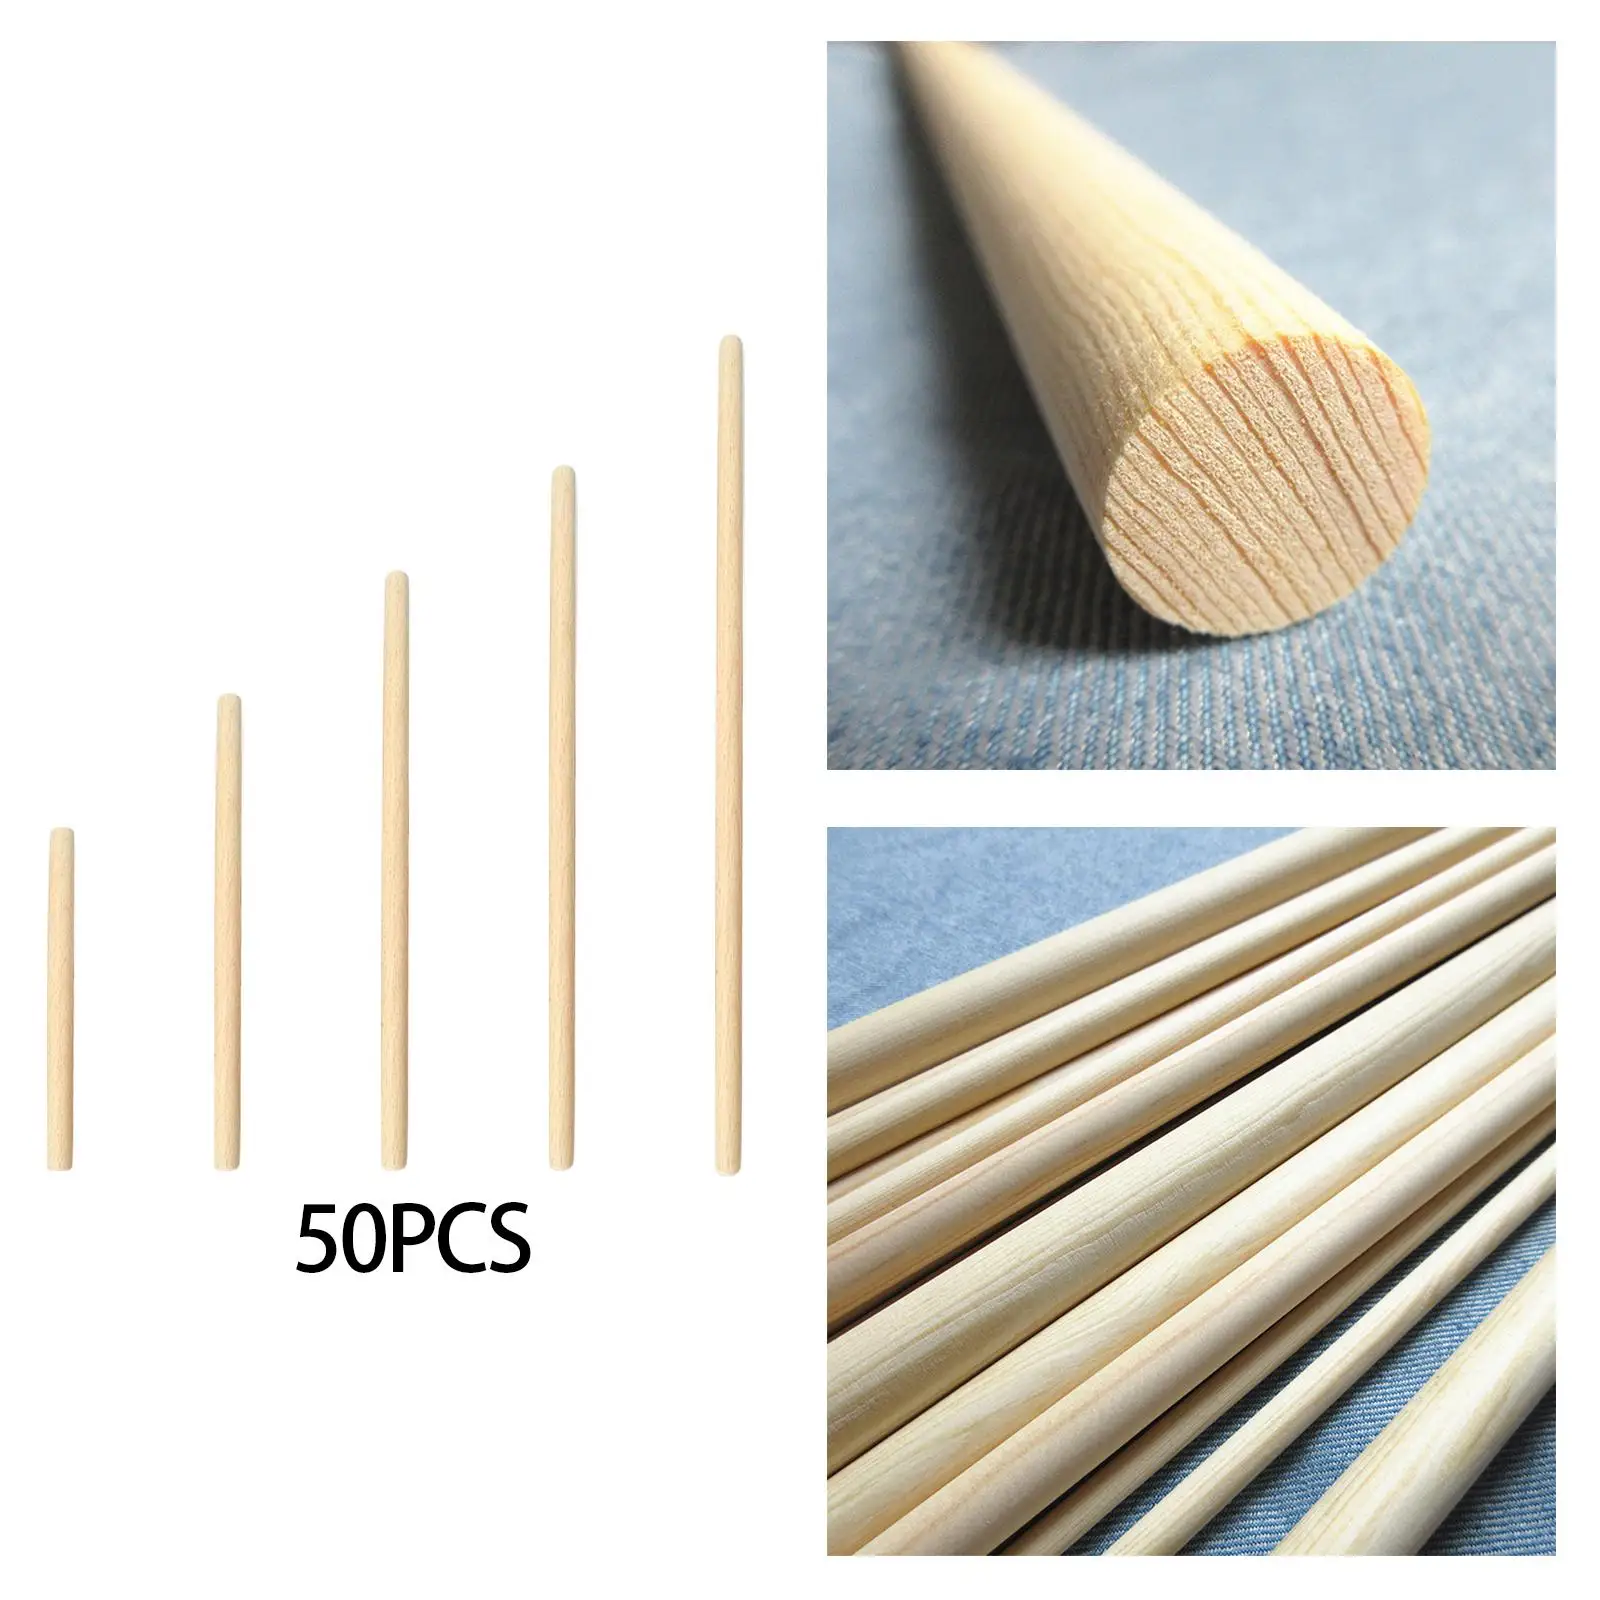 50 Pieces Doweling Rods Unfinished Round Wood Sticks for Building Model Macrame Home Garden Decoration Art Projects